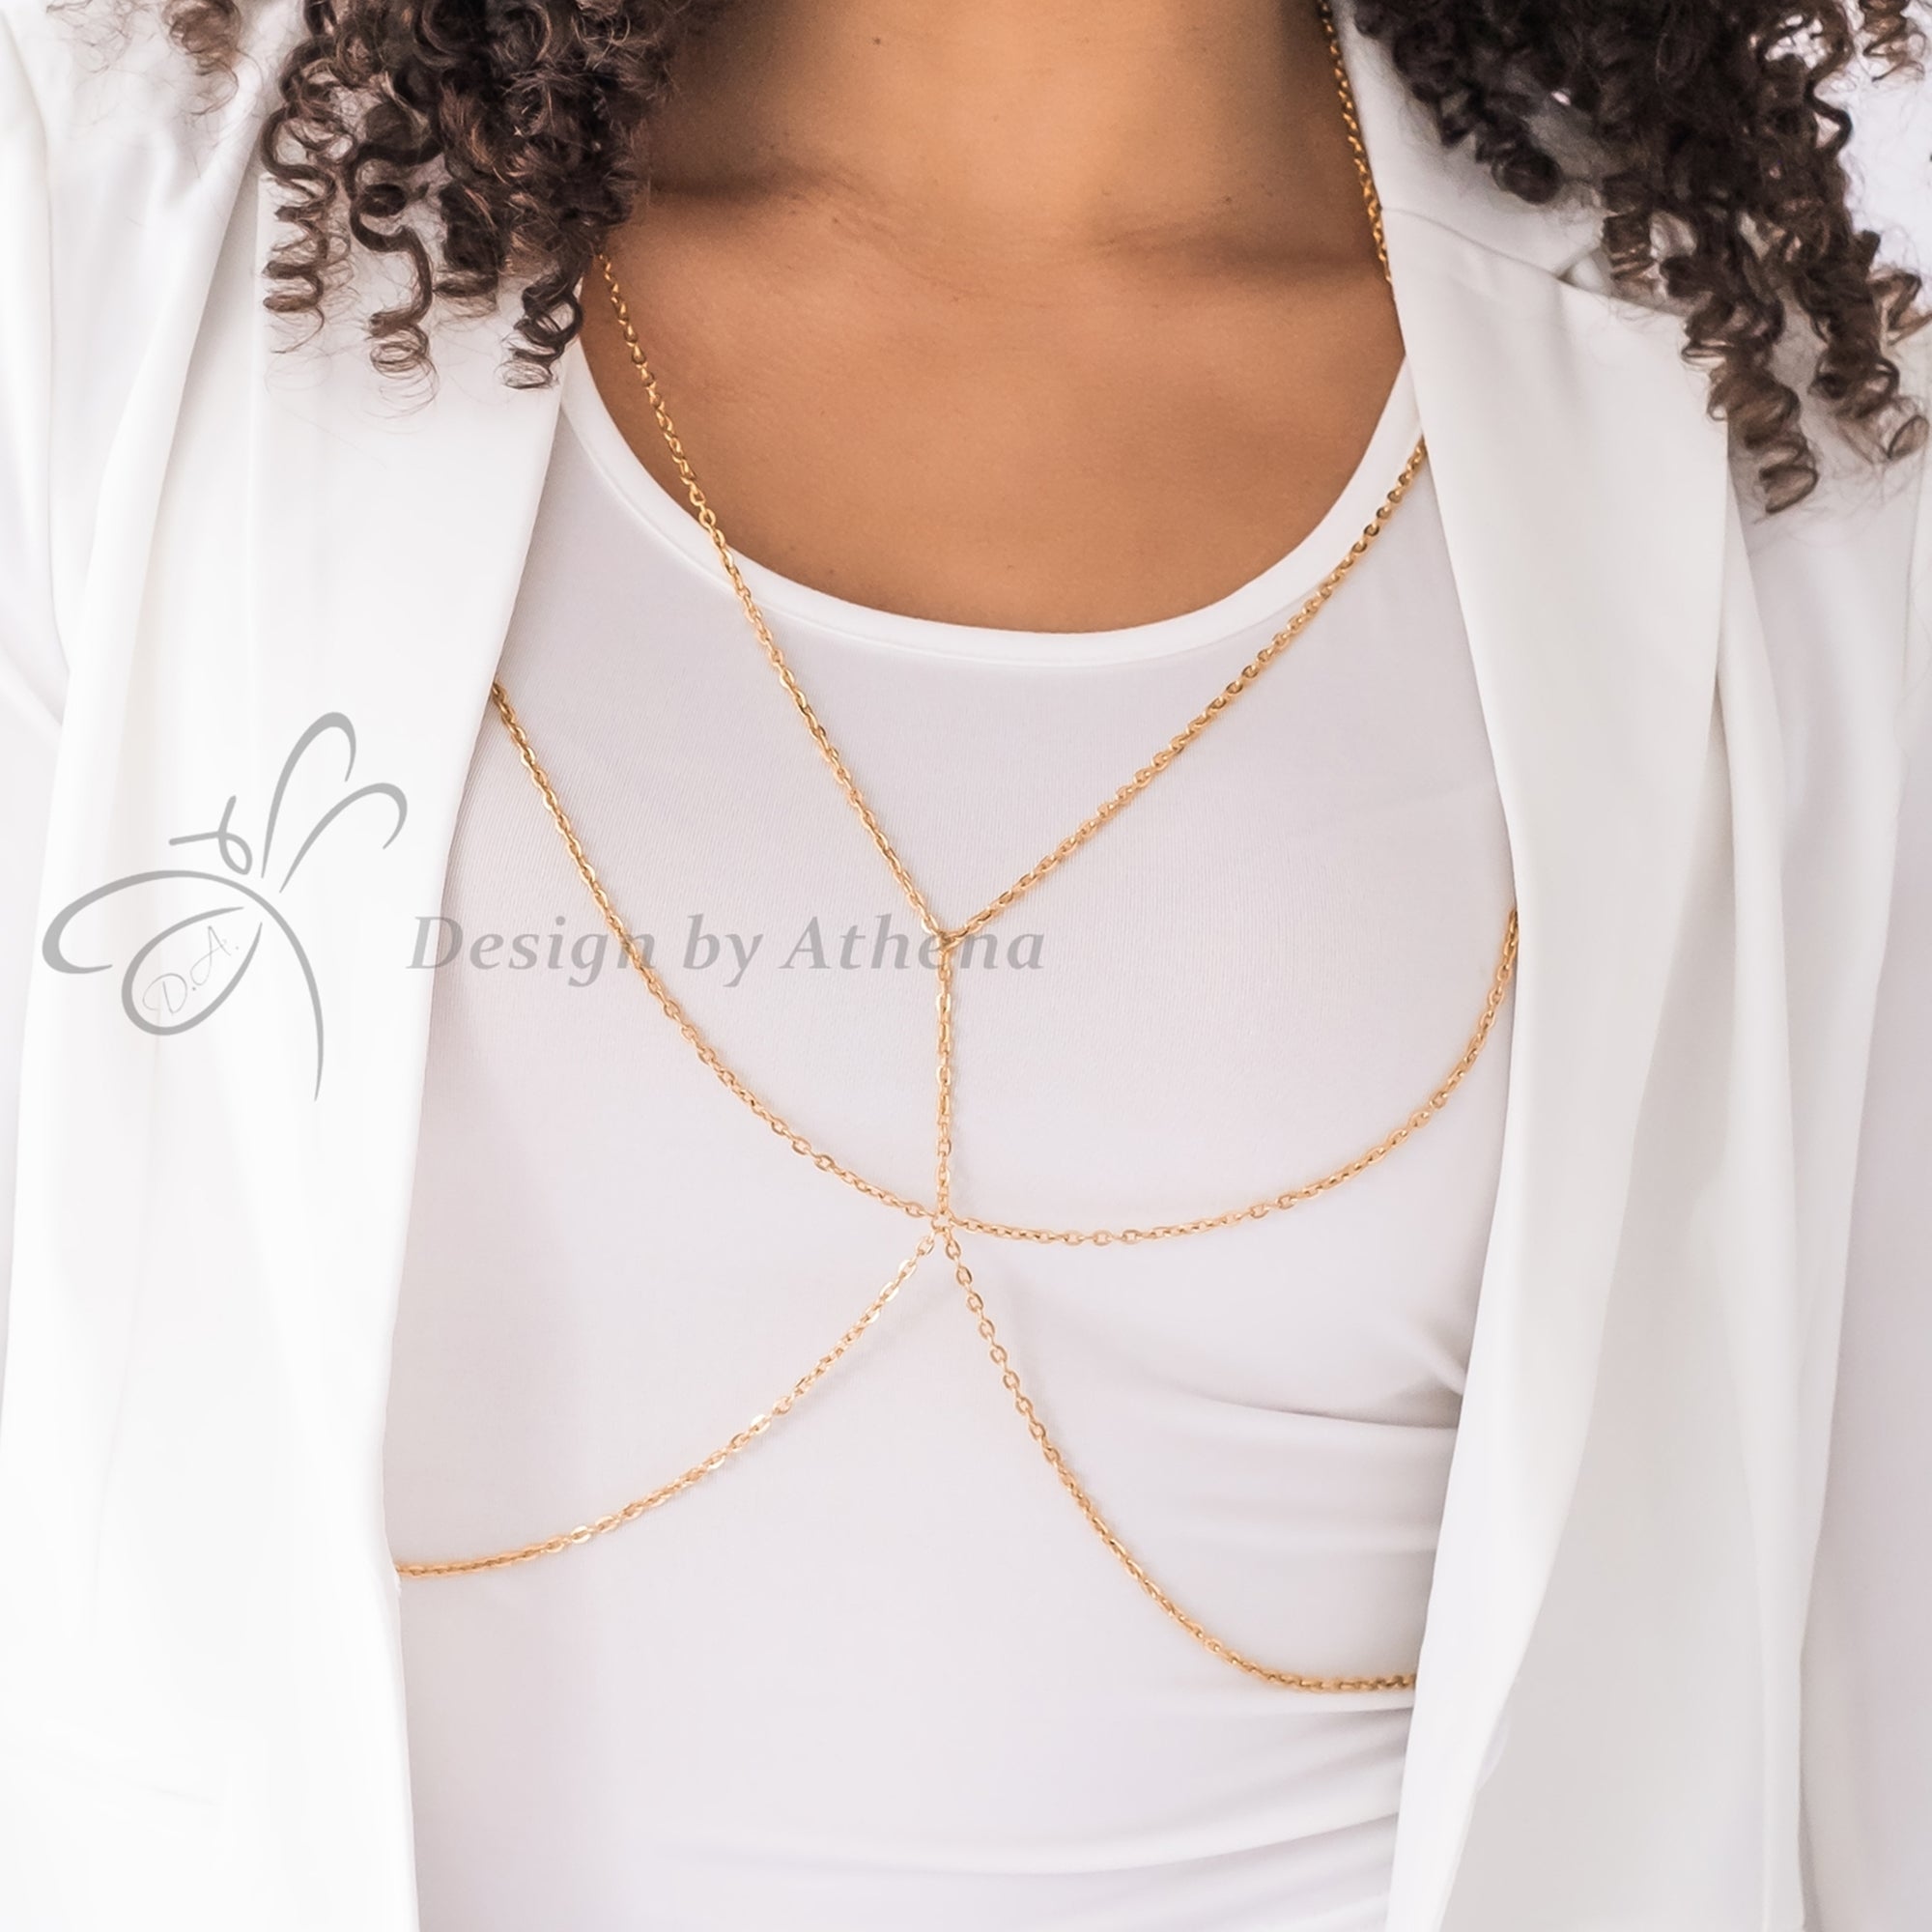 Party Body Chains Body Chain,Gold Chunky Metal Body Shoulder Chain Jewelry  Necklace Shoulder Chain Harness Dress Decor Chain Jewelry Body Jewelry